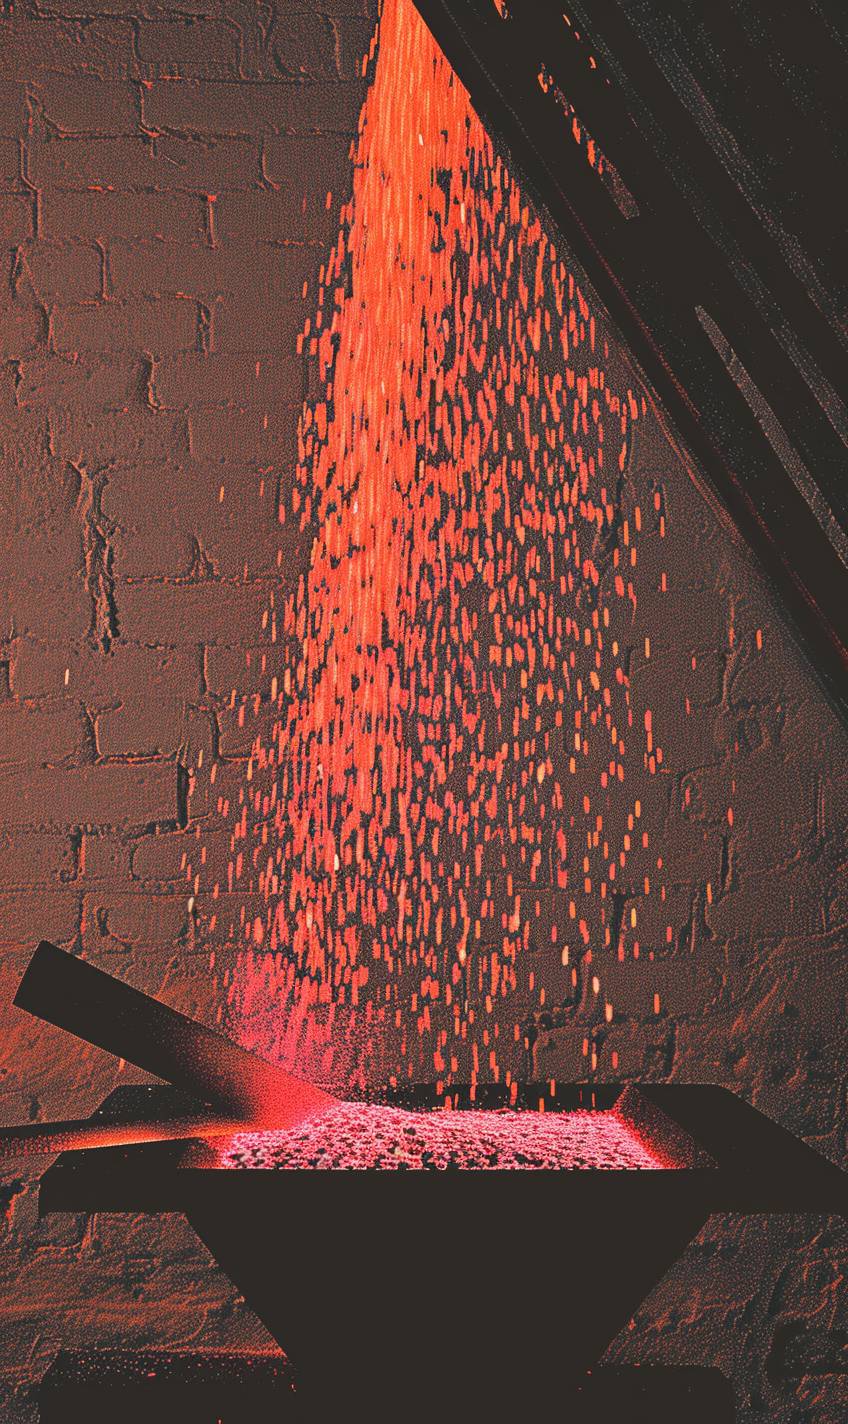 A medieval blacksmith's forge, glowing hot metal being hammered, sparks flying